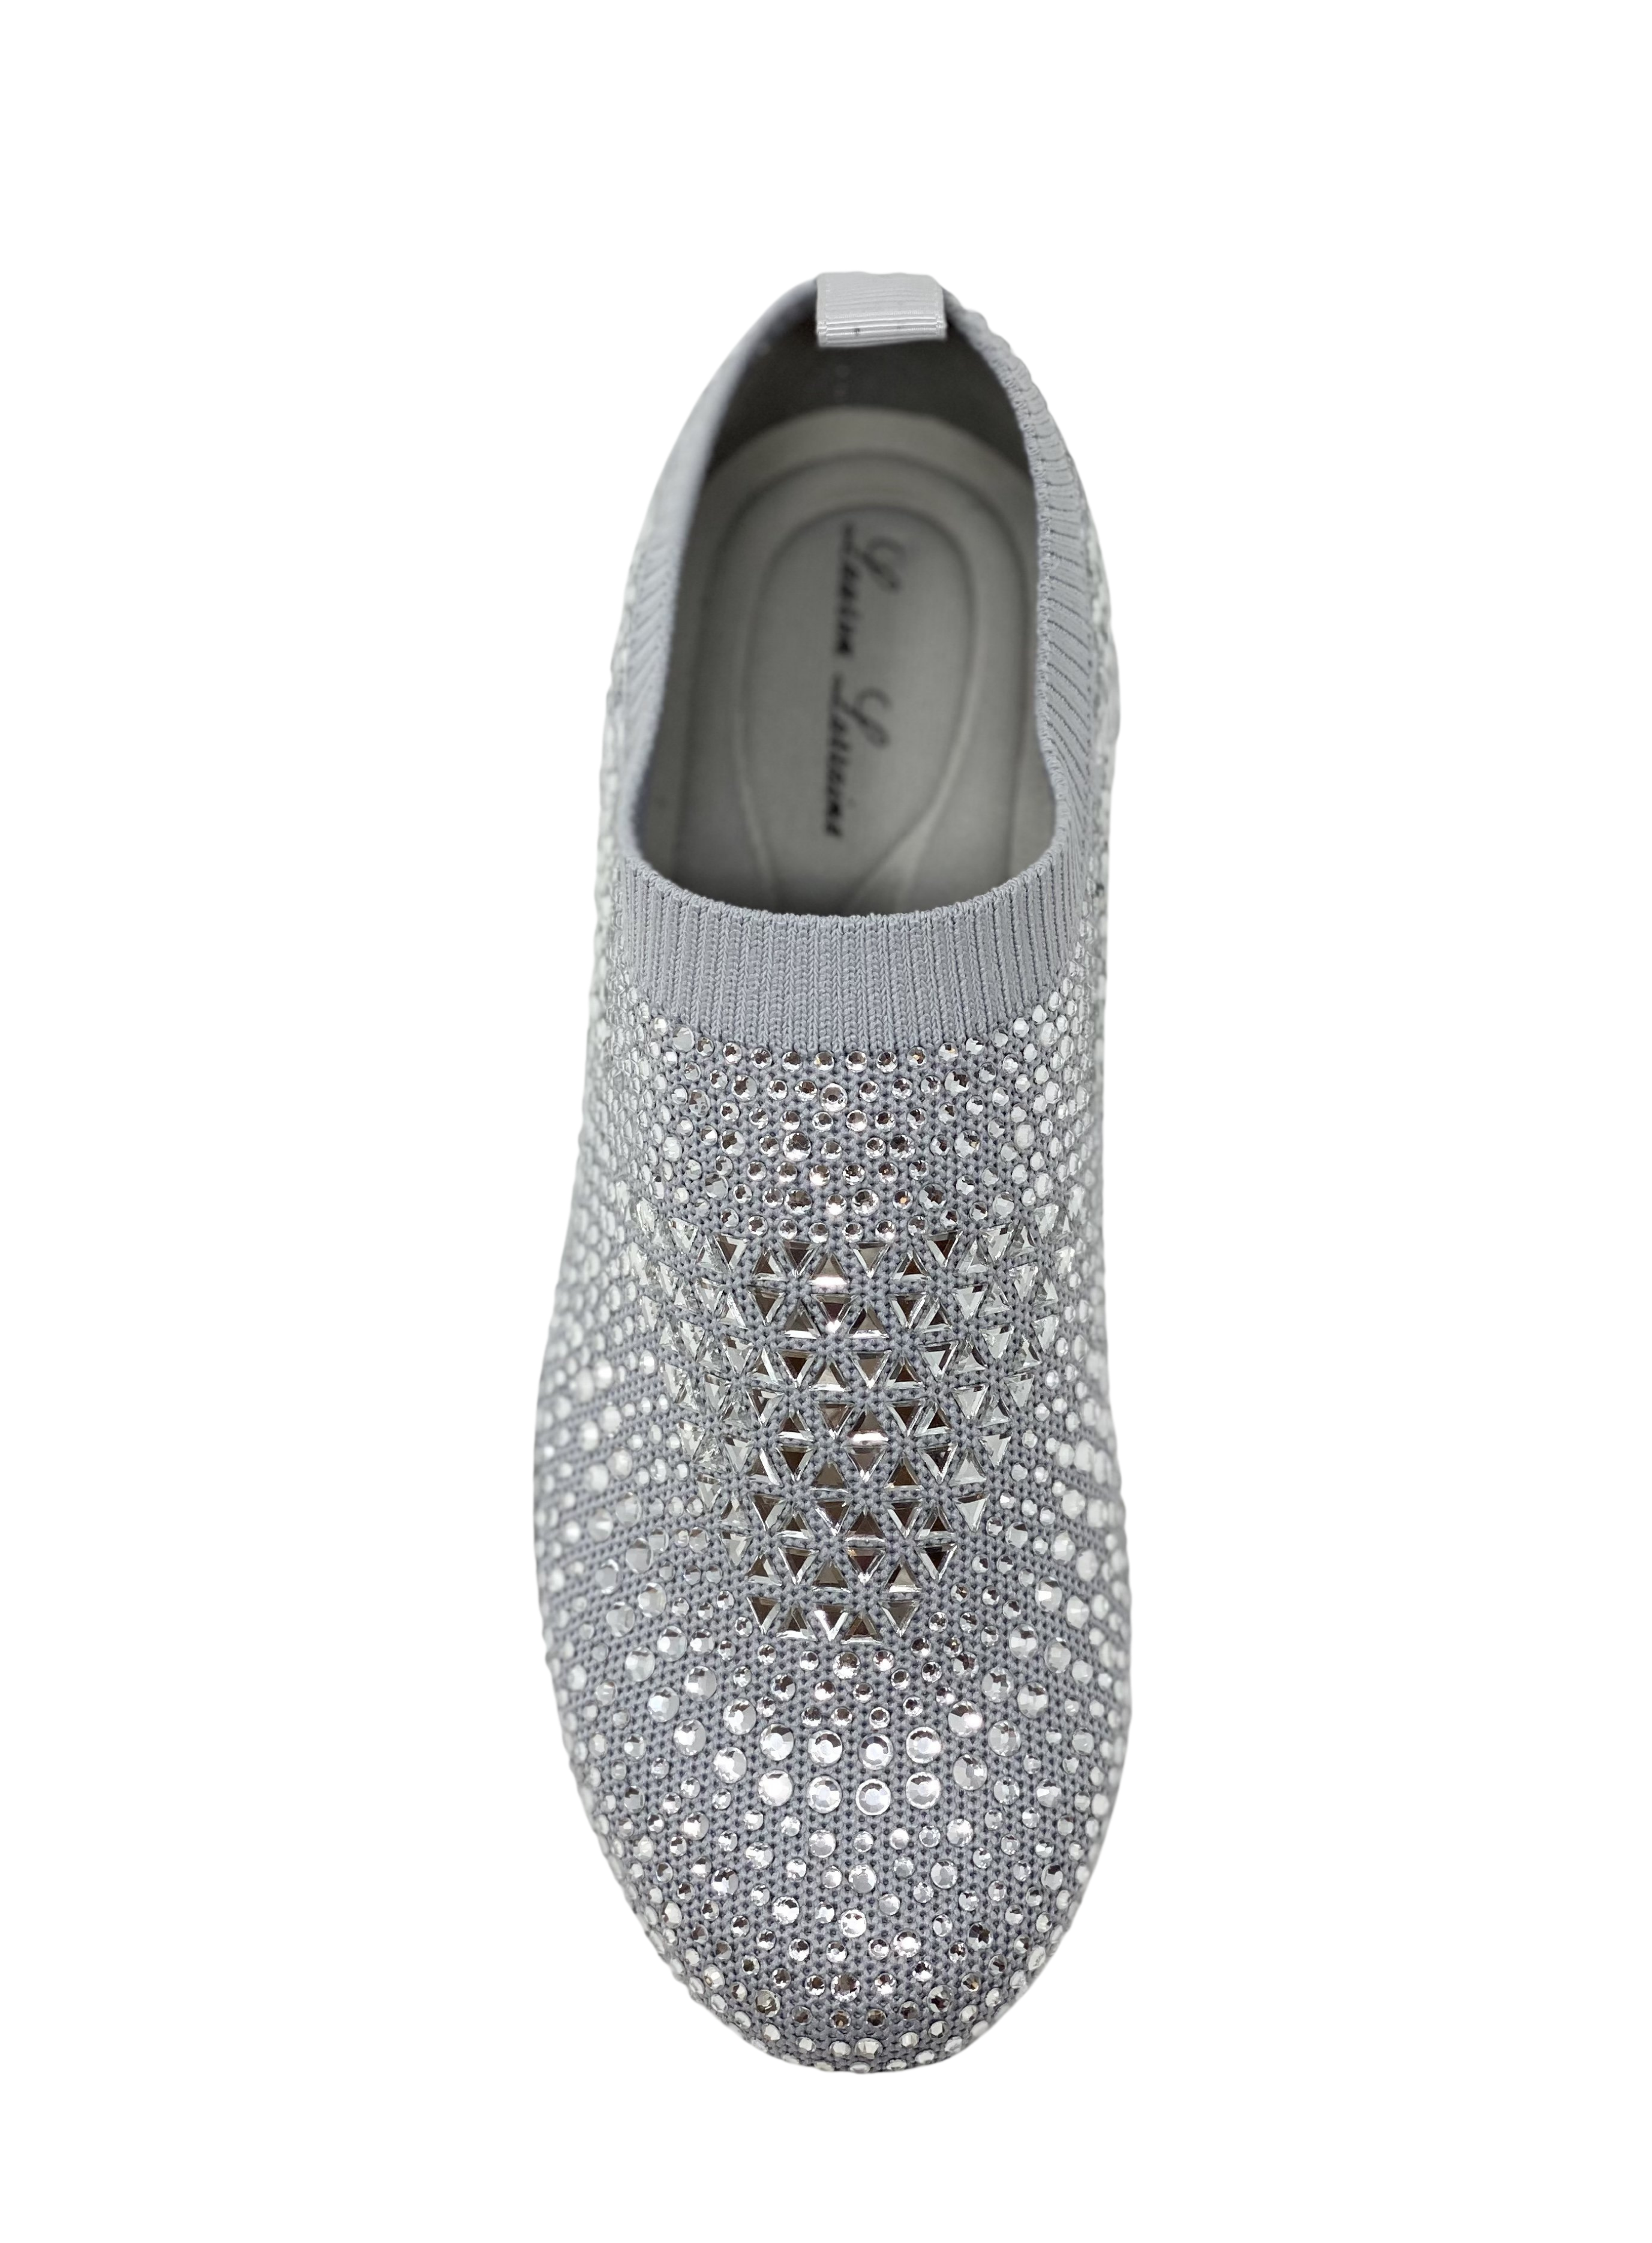 CARRY SNEAKER WITH SPARKLY RHINESTONE